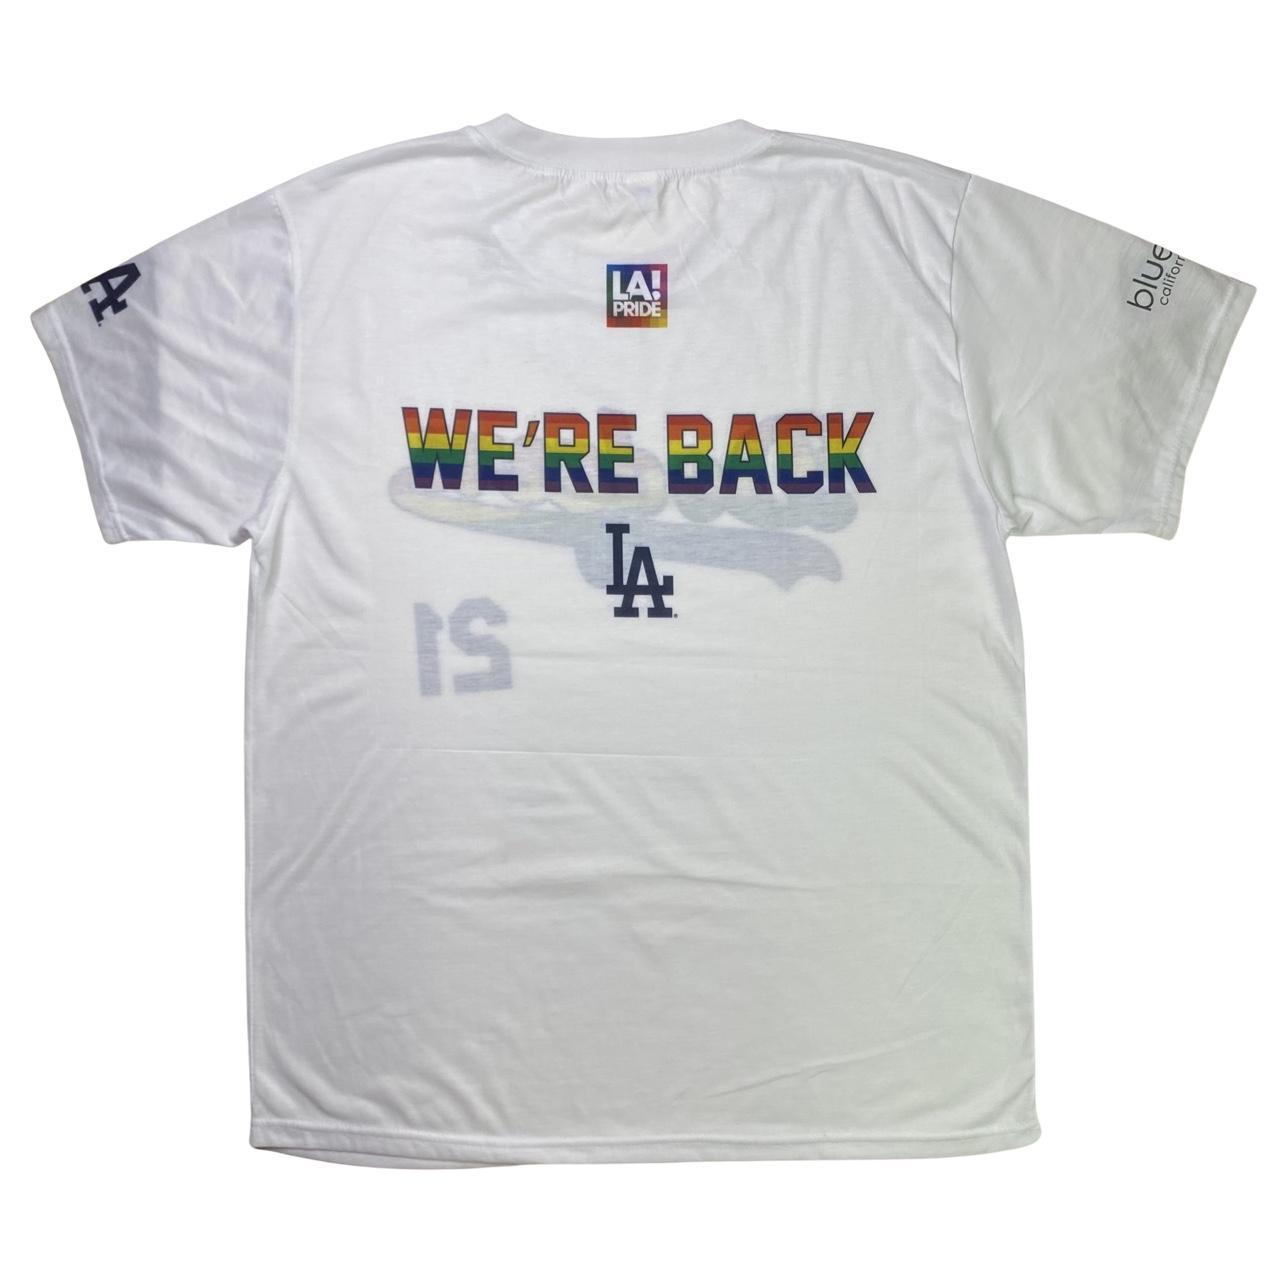 Los Angeles Dodgers We’re Back Pride Rainbow White Tee T-Shirt Size XL